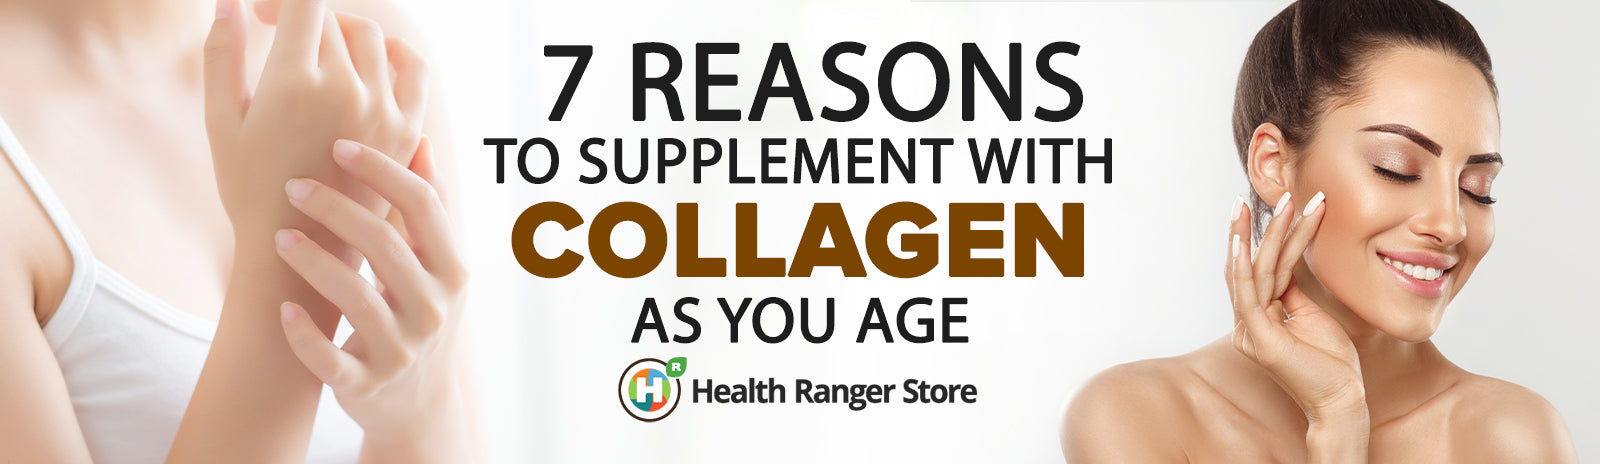 Why you should supplement with collagen as you age